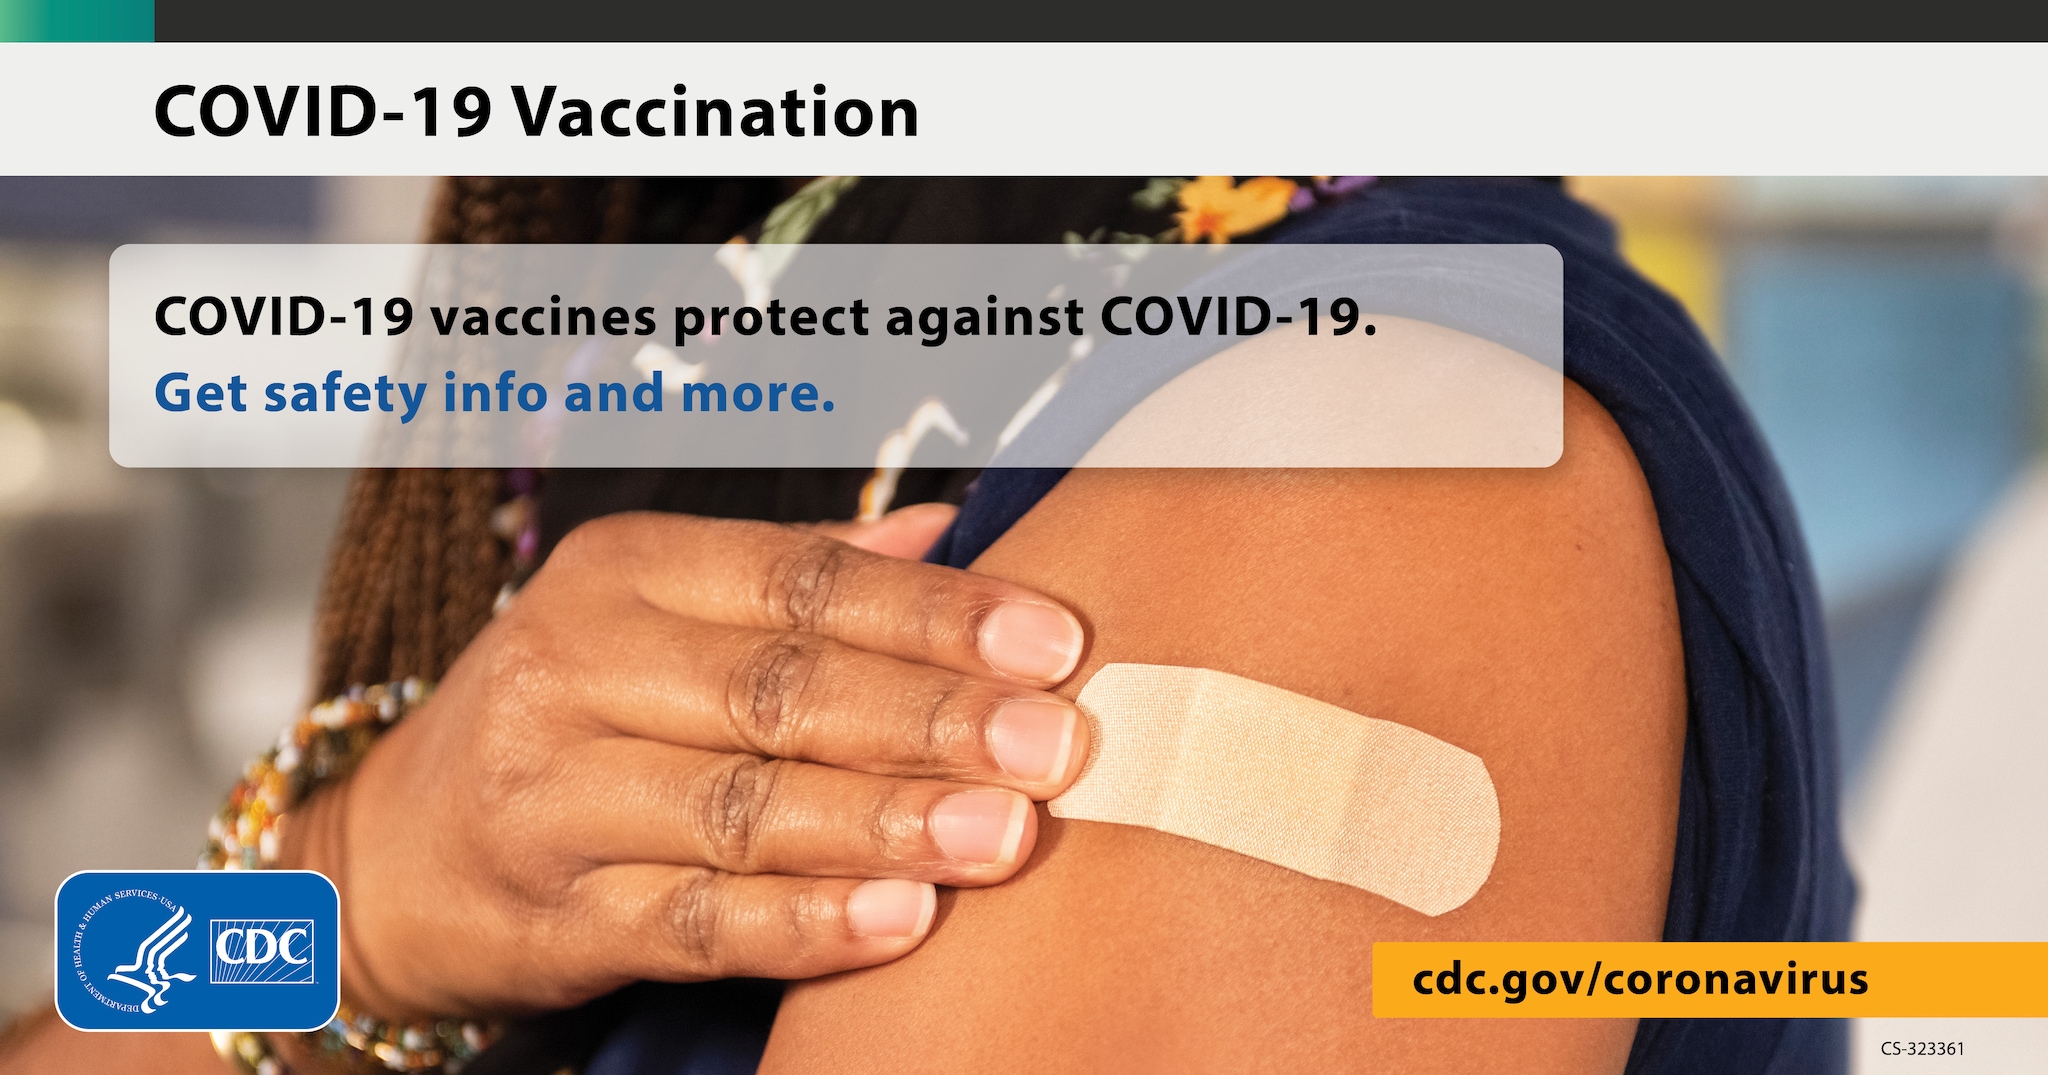 COVID-19 Vaccines for Moderately to Severely Immunocompromised People